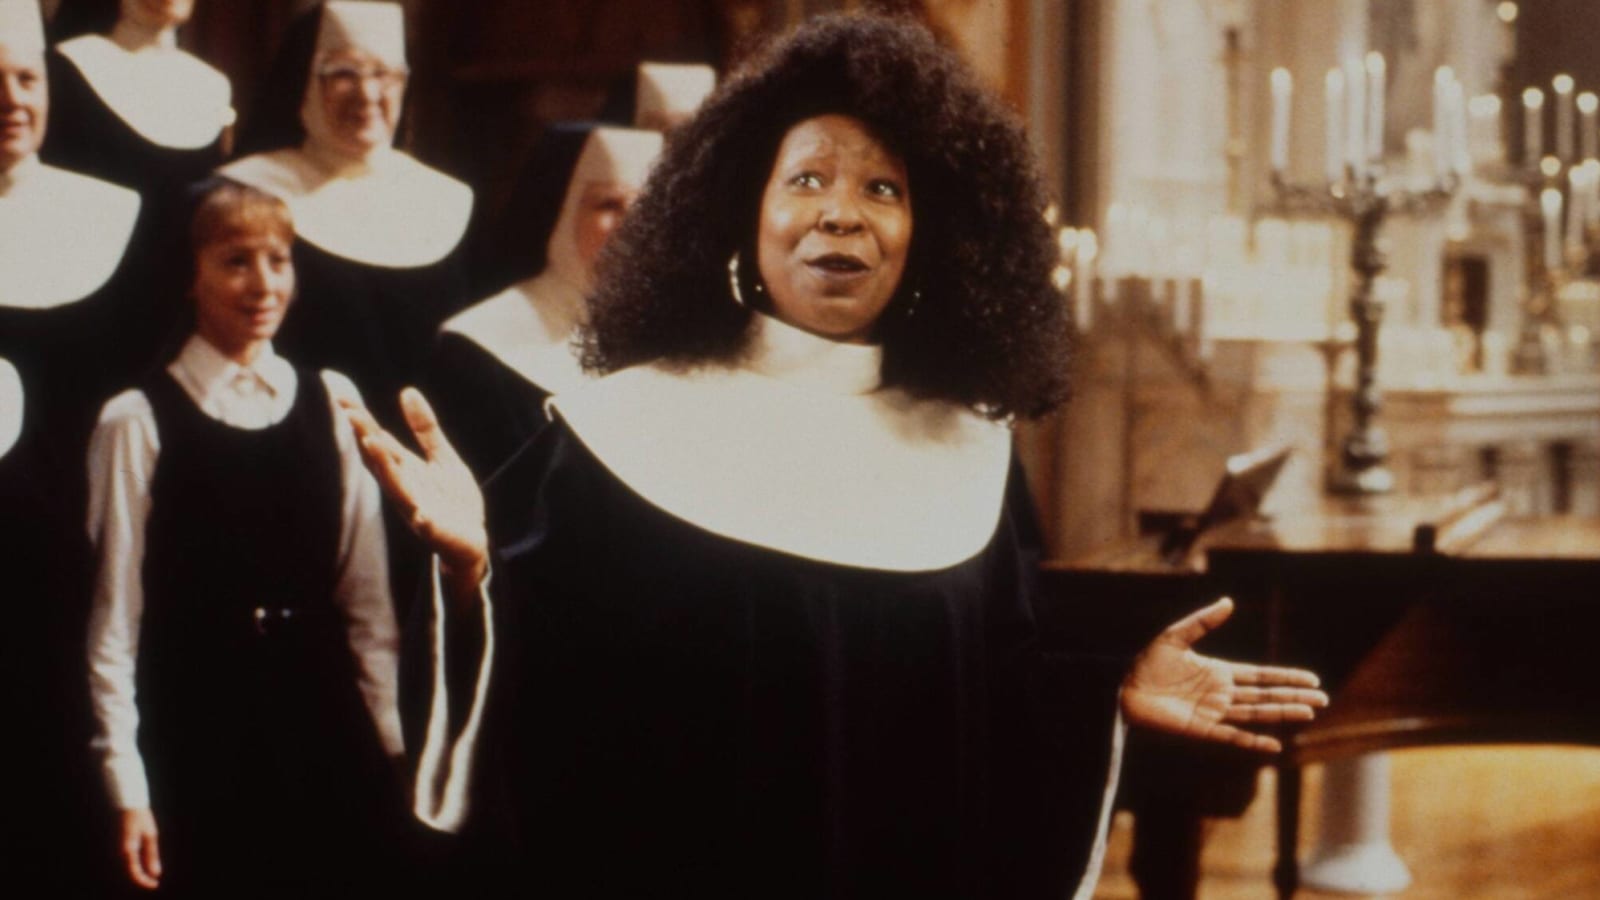 20 facts you might not know about 'Sister Act'